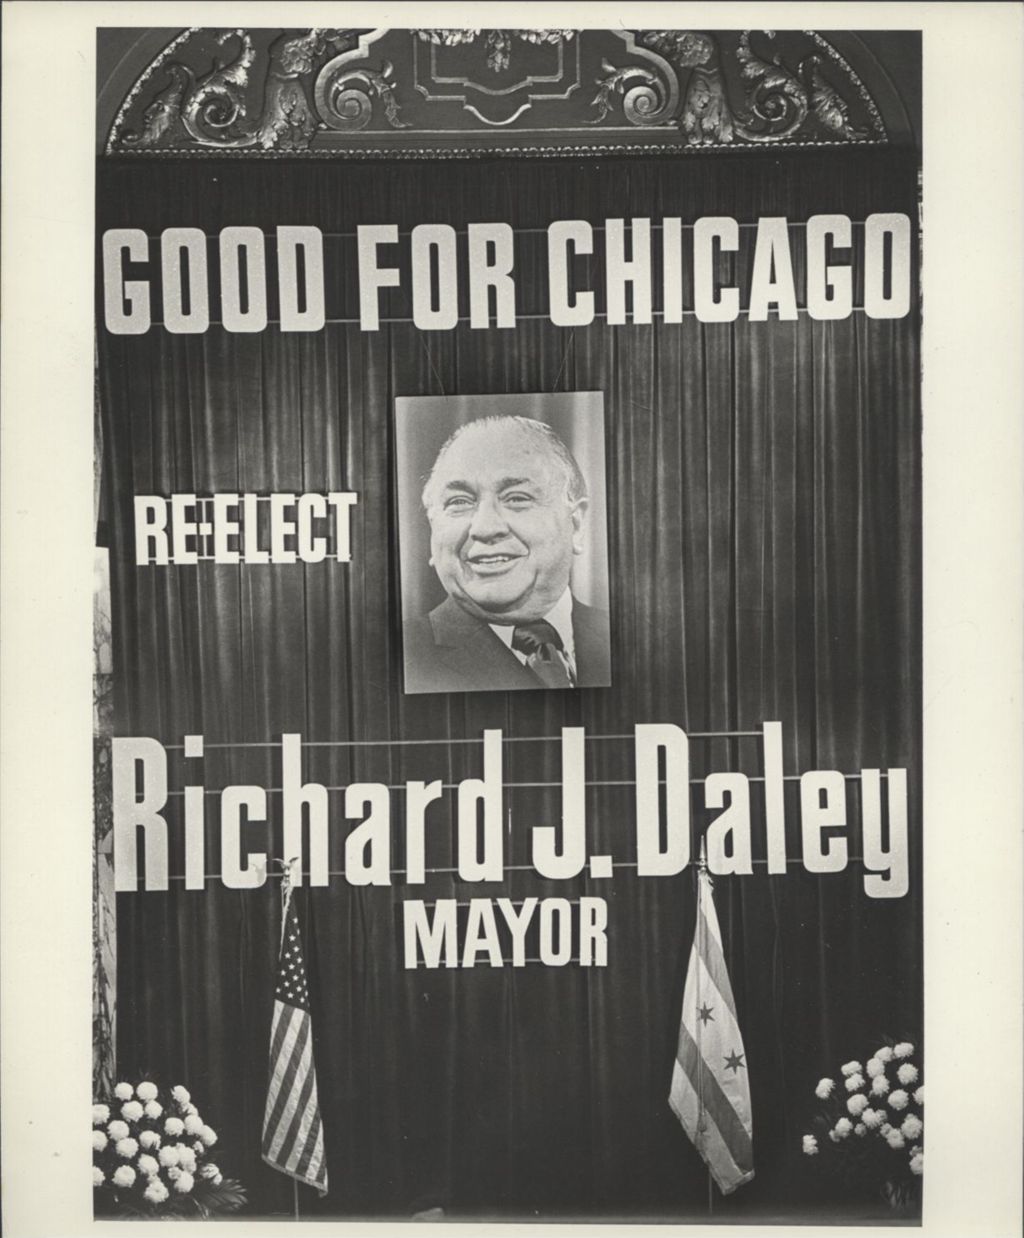 Stage at Richard J. Daley re-election event